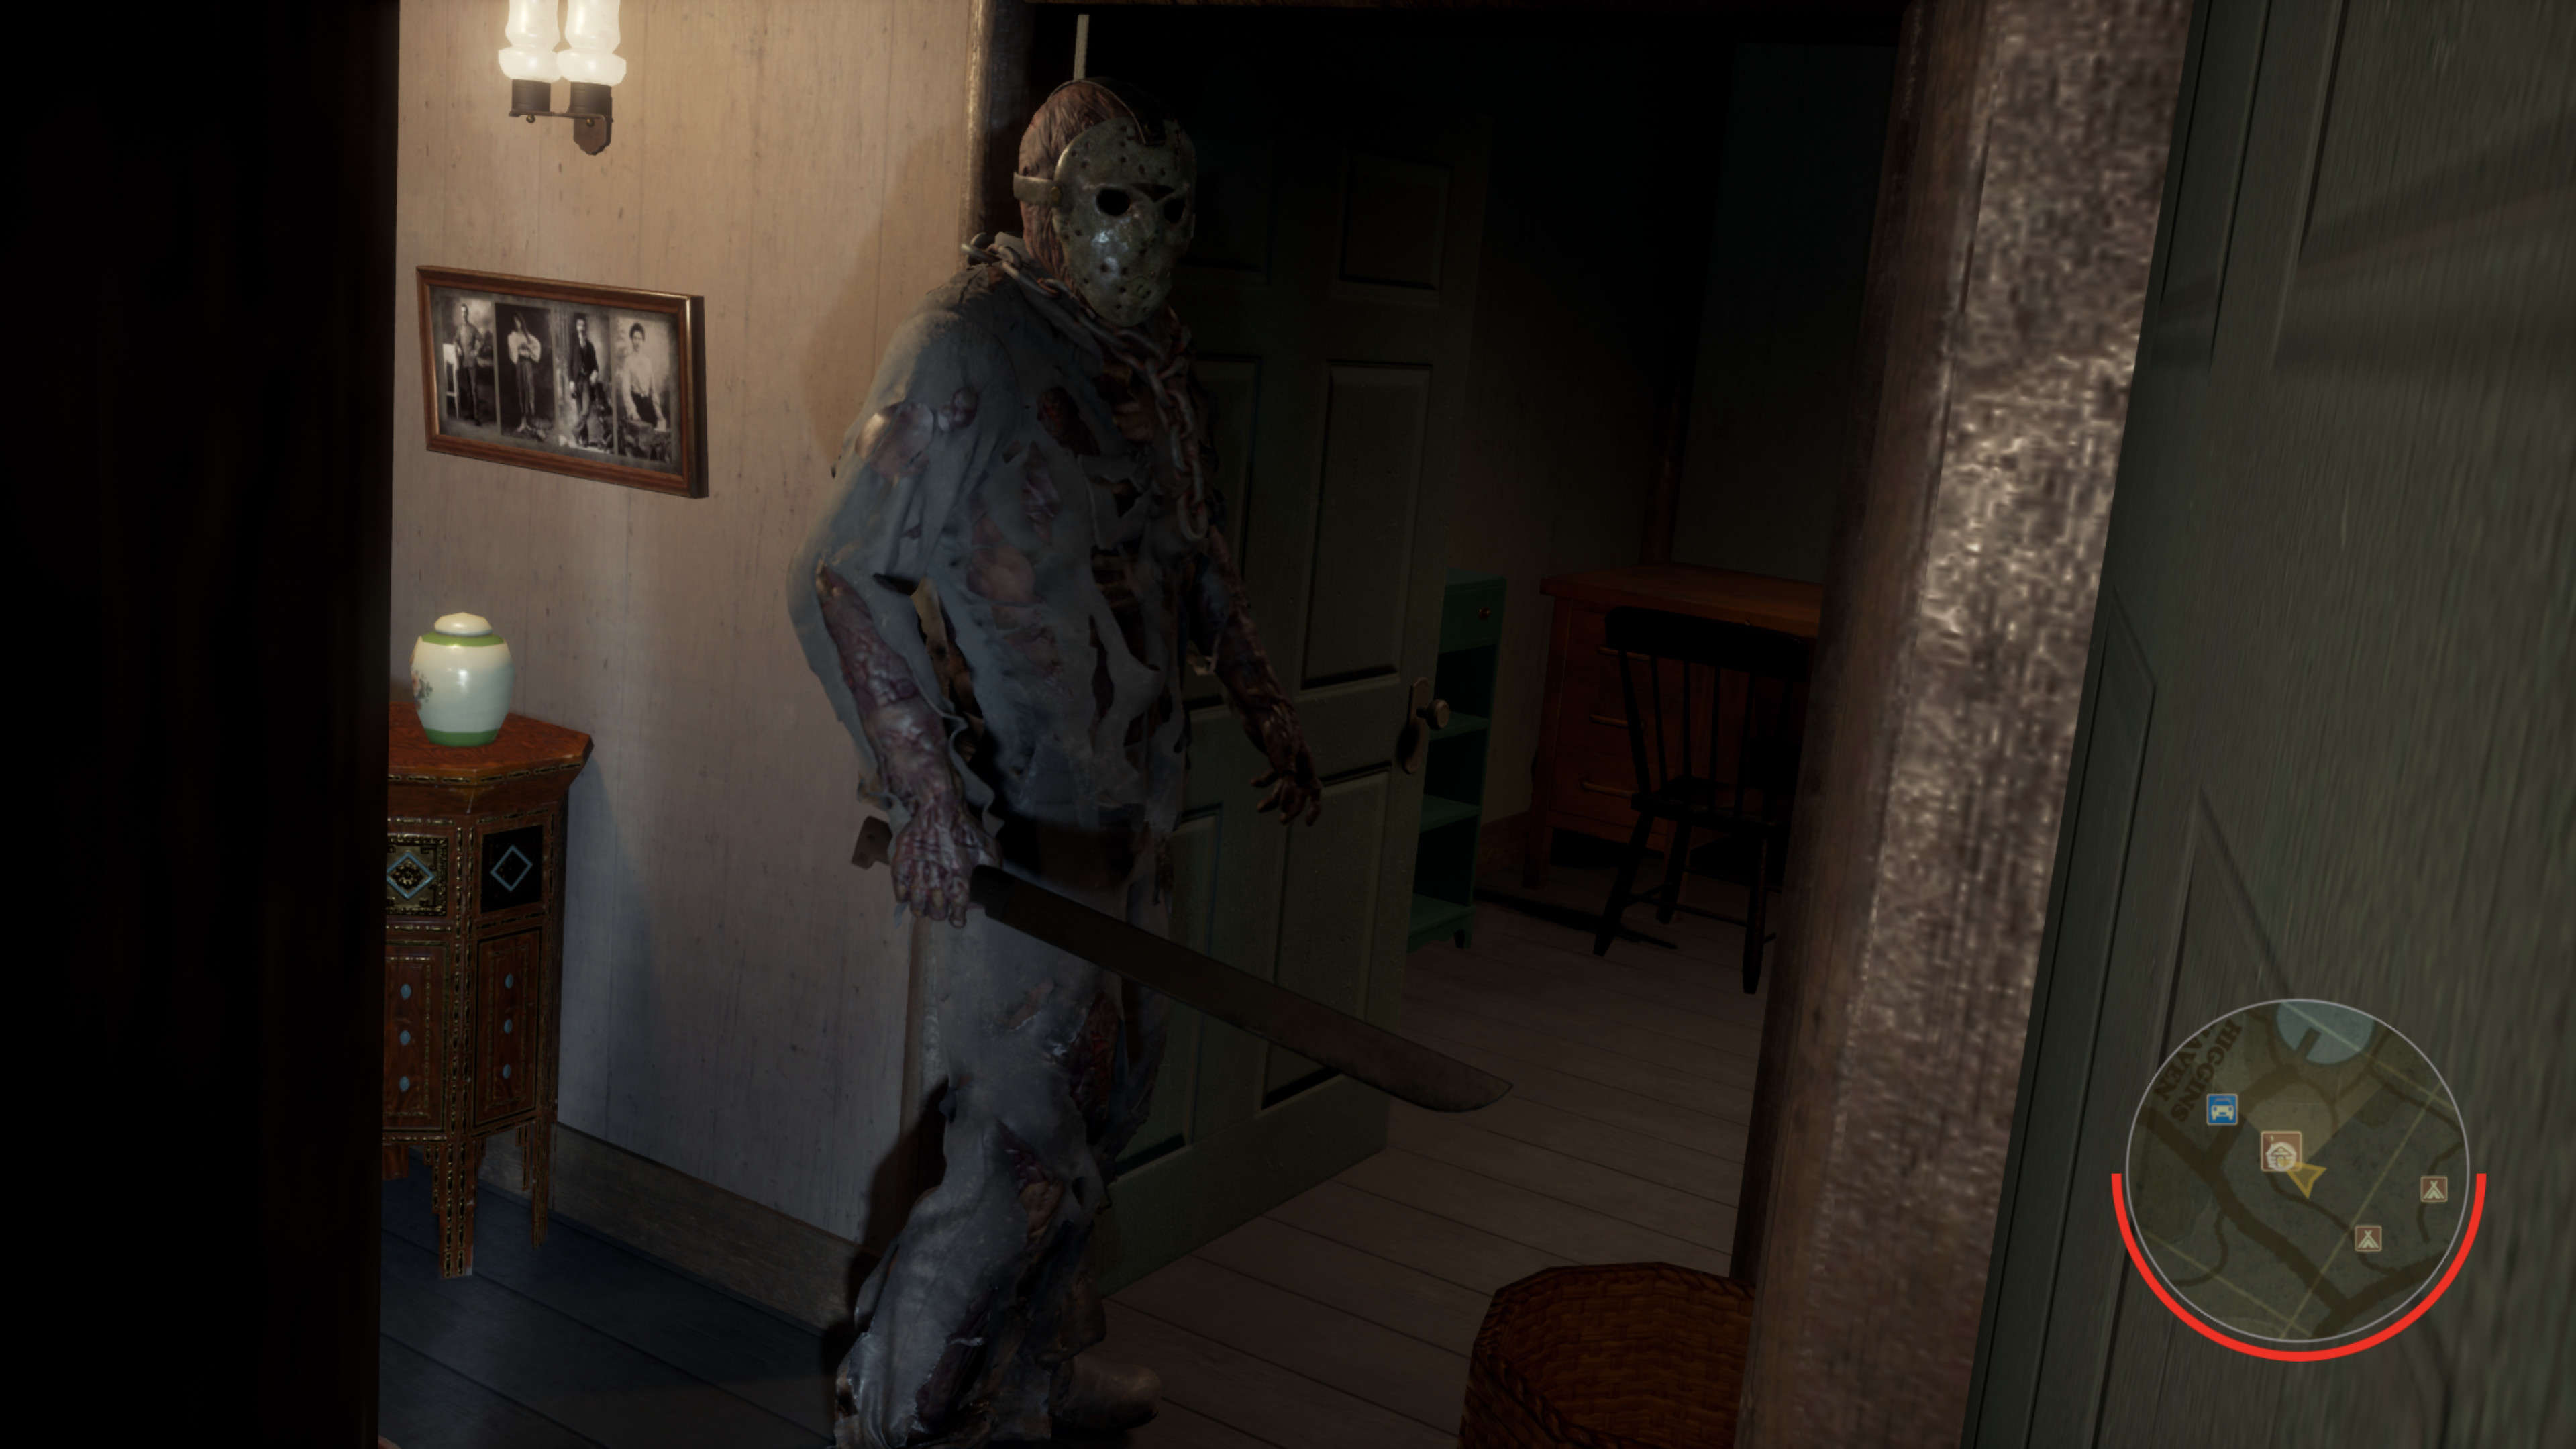 Is Friday the 13th cross-platform? PC, Xbox, PlayStation, and